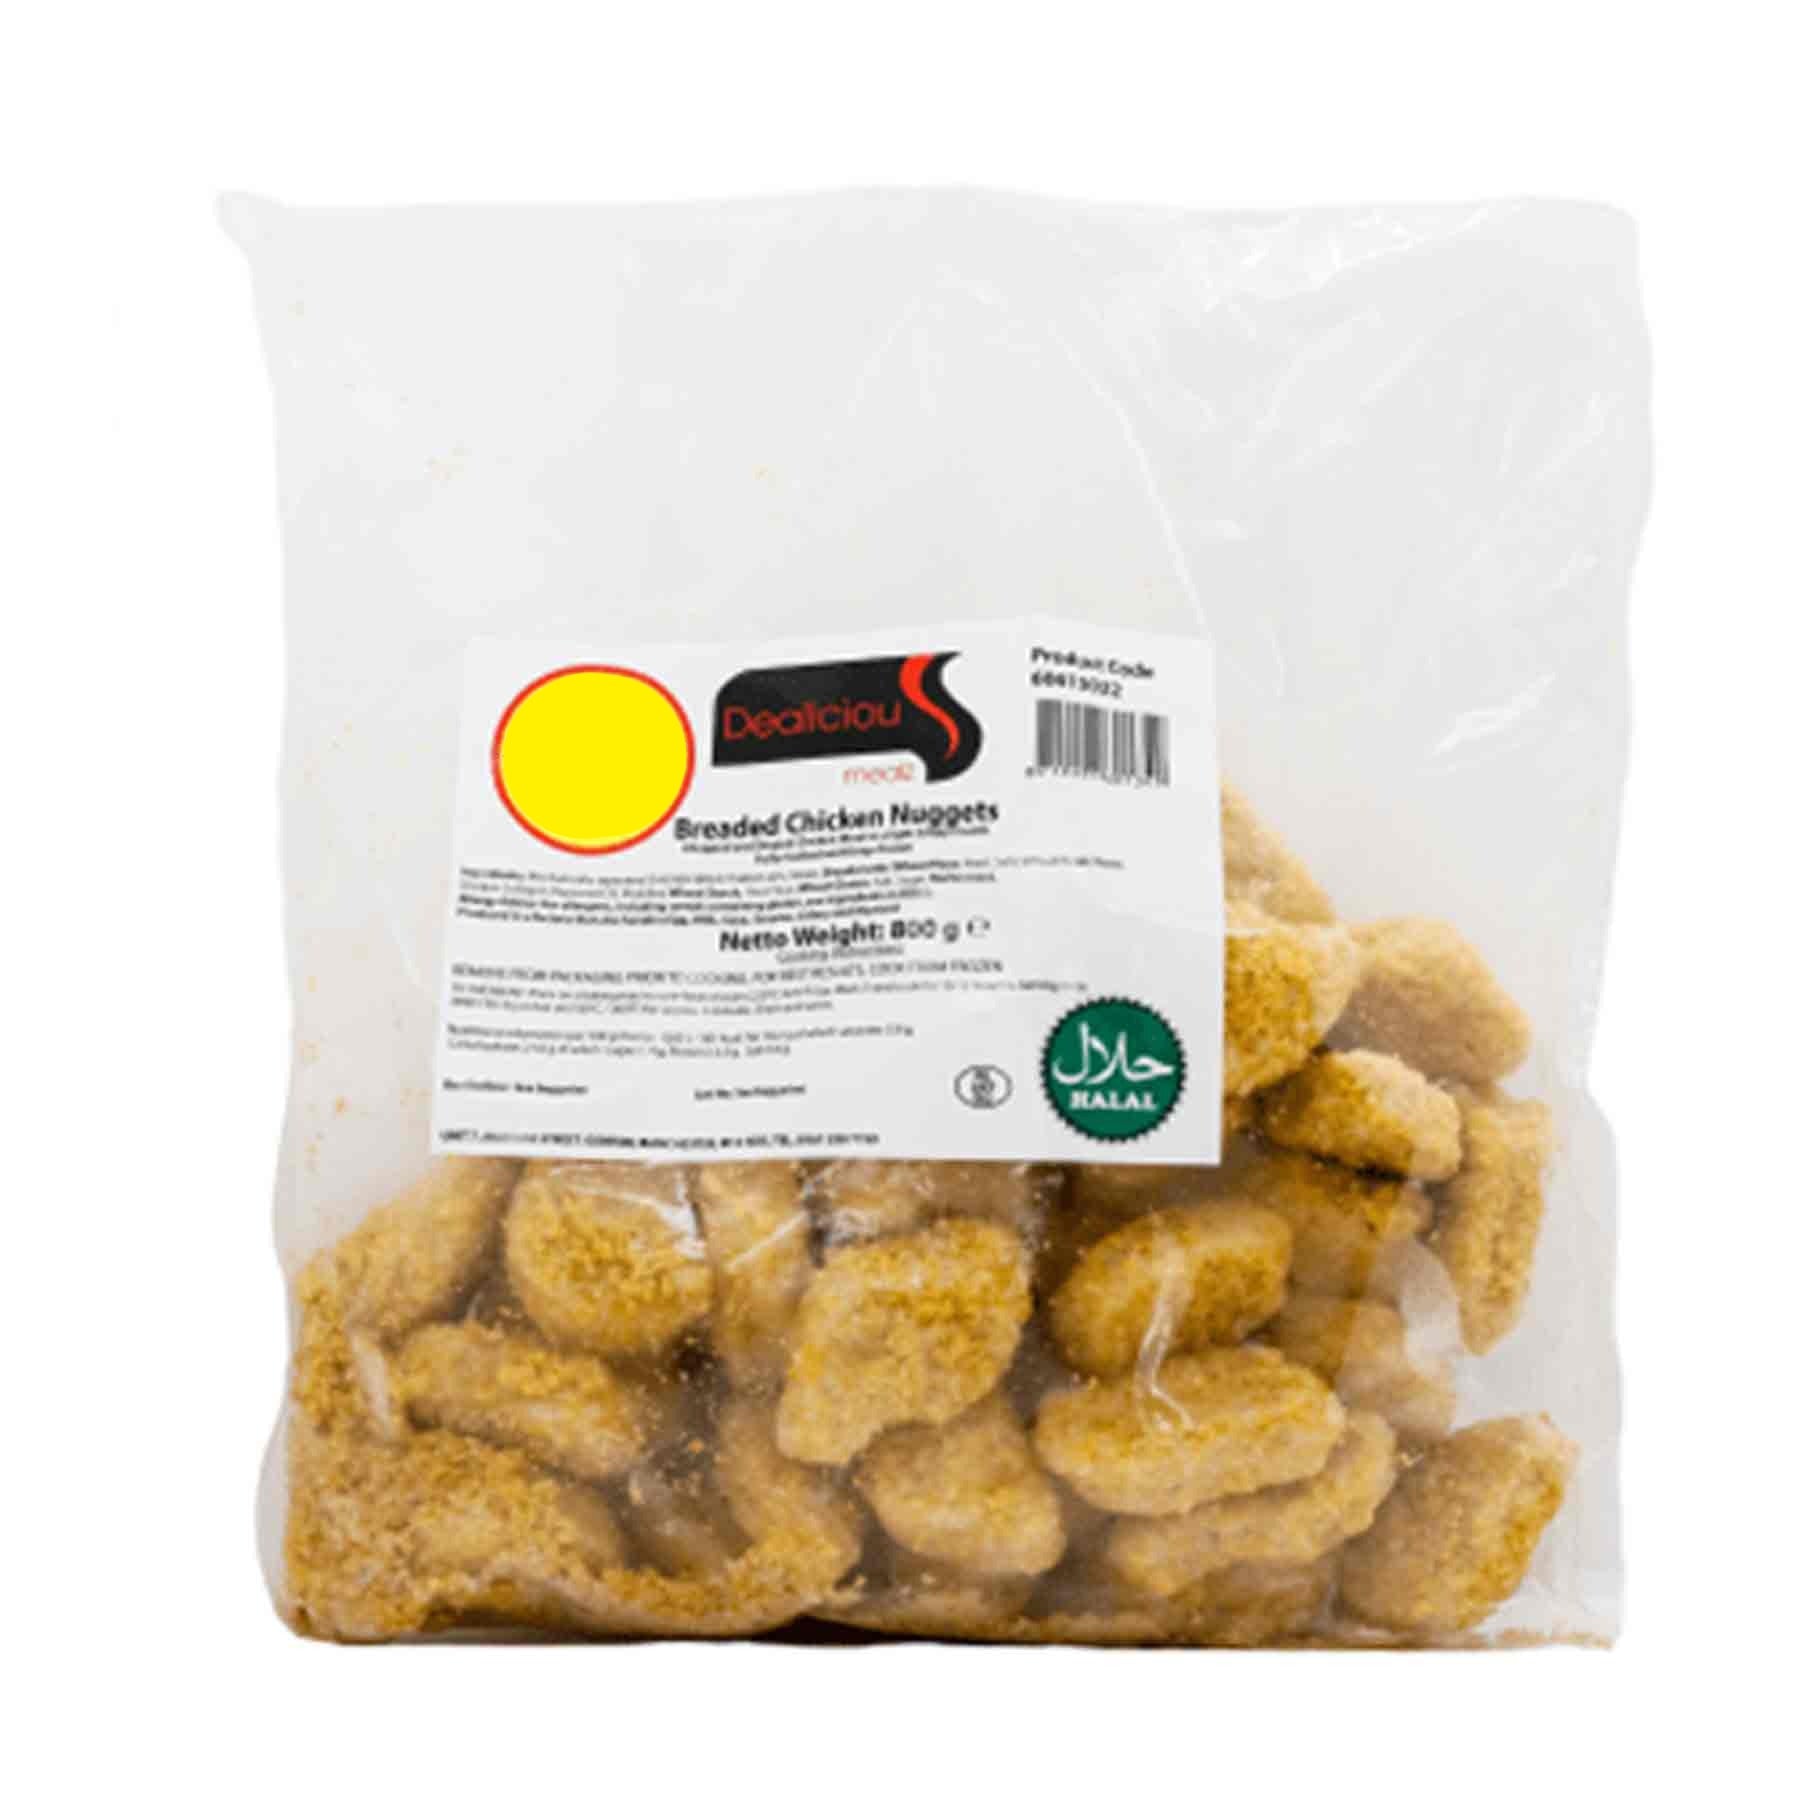 Dealicious Mealz Chicken Nuggets MULTI-BUY OFFER 3 For £10.99